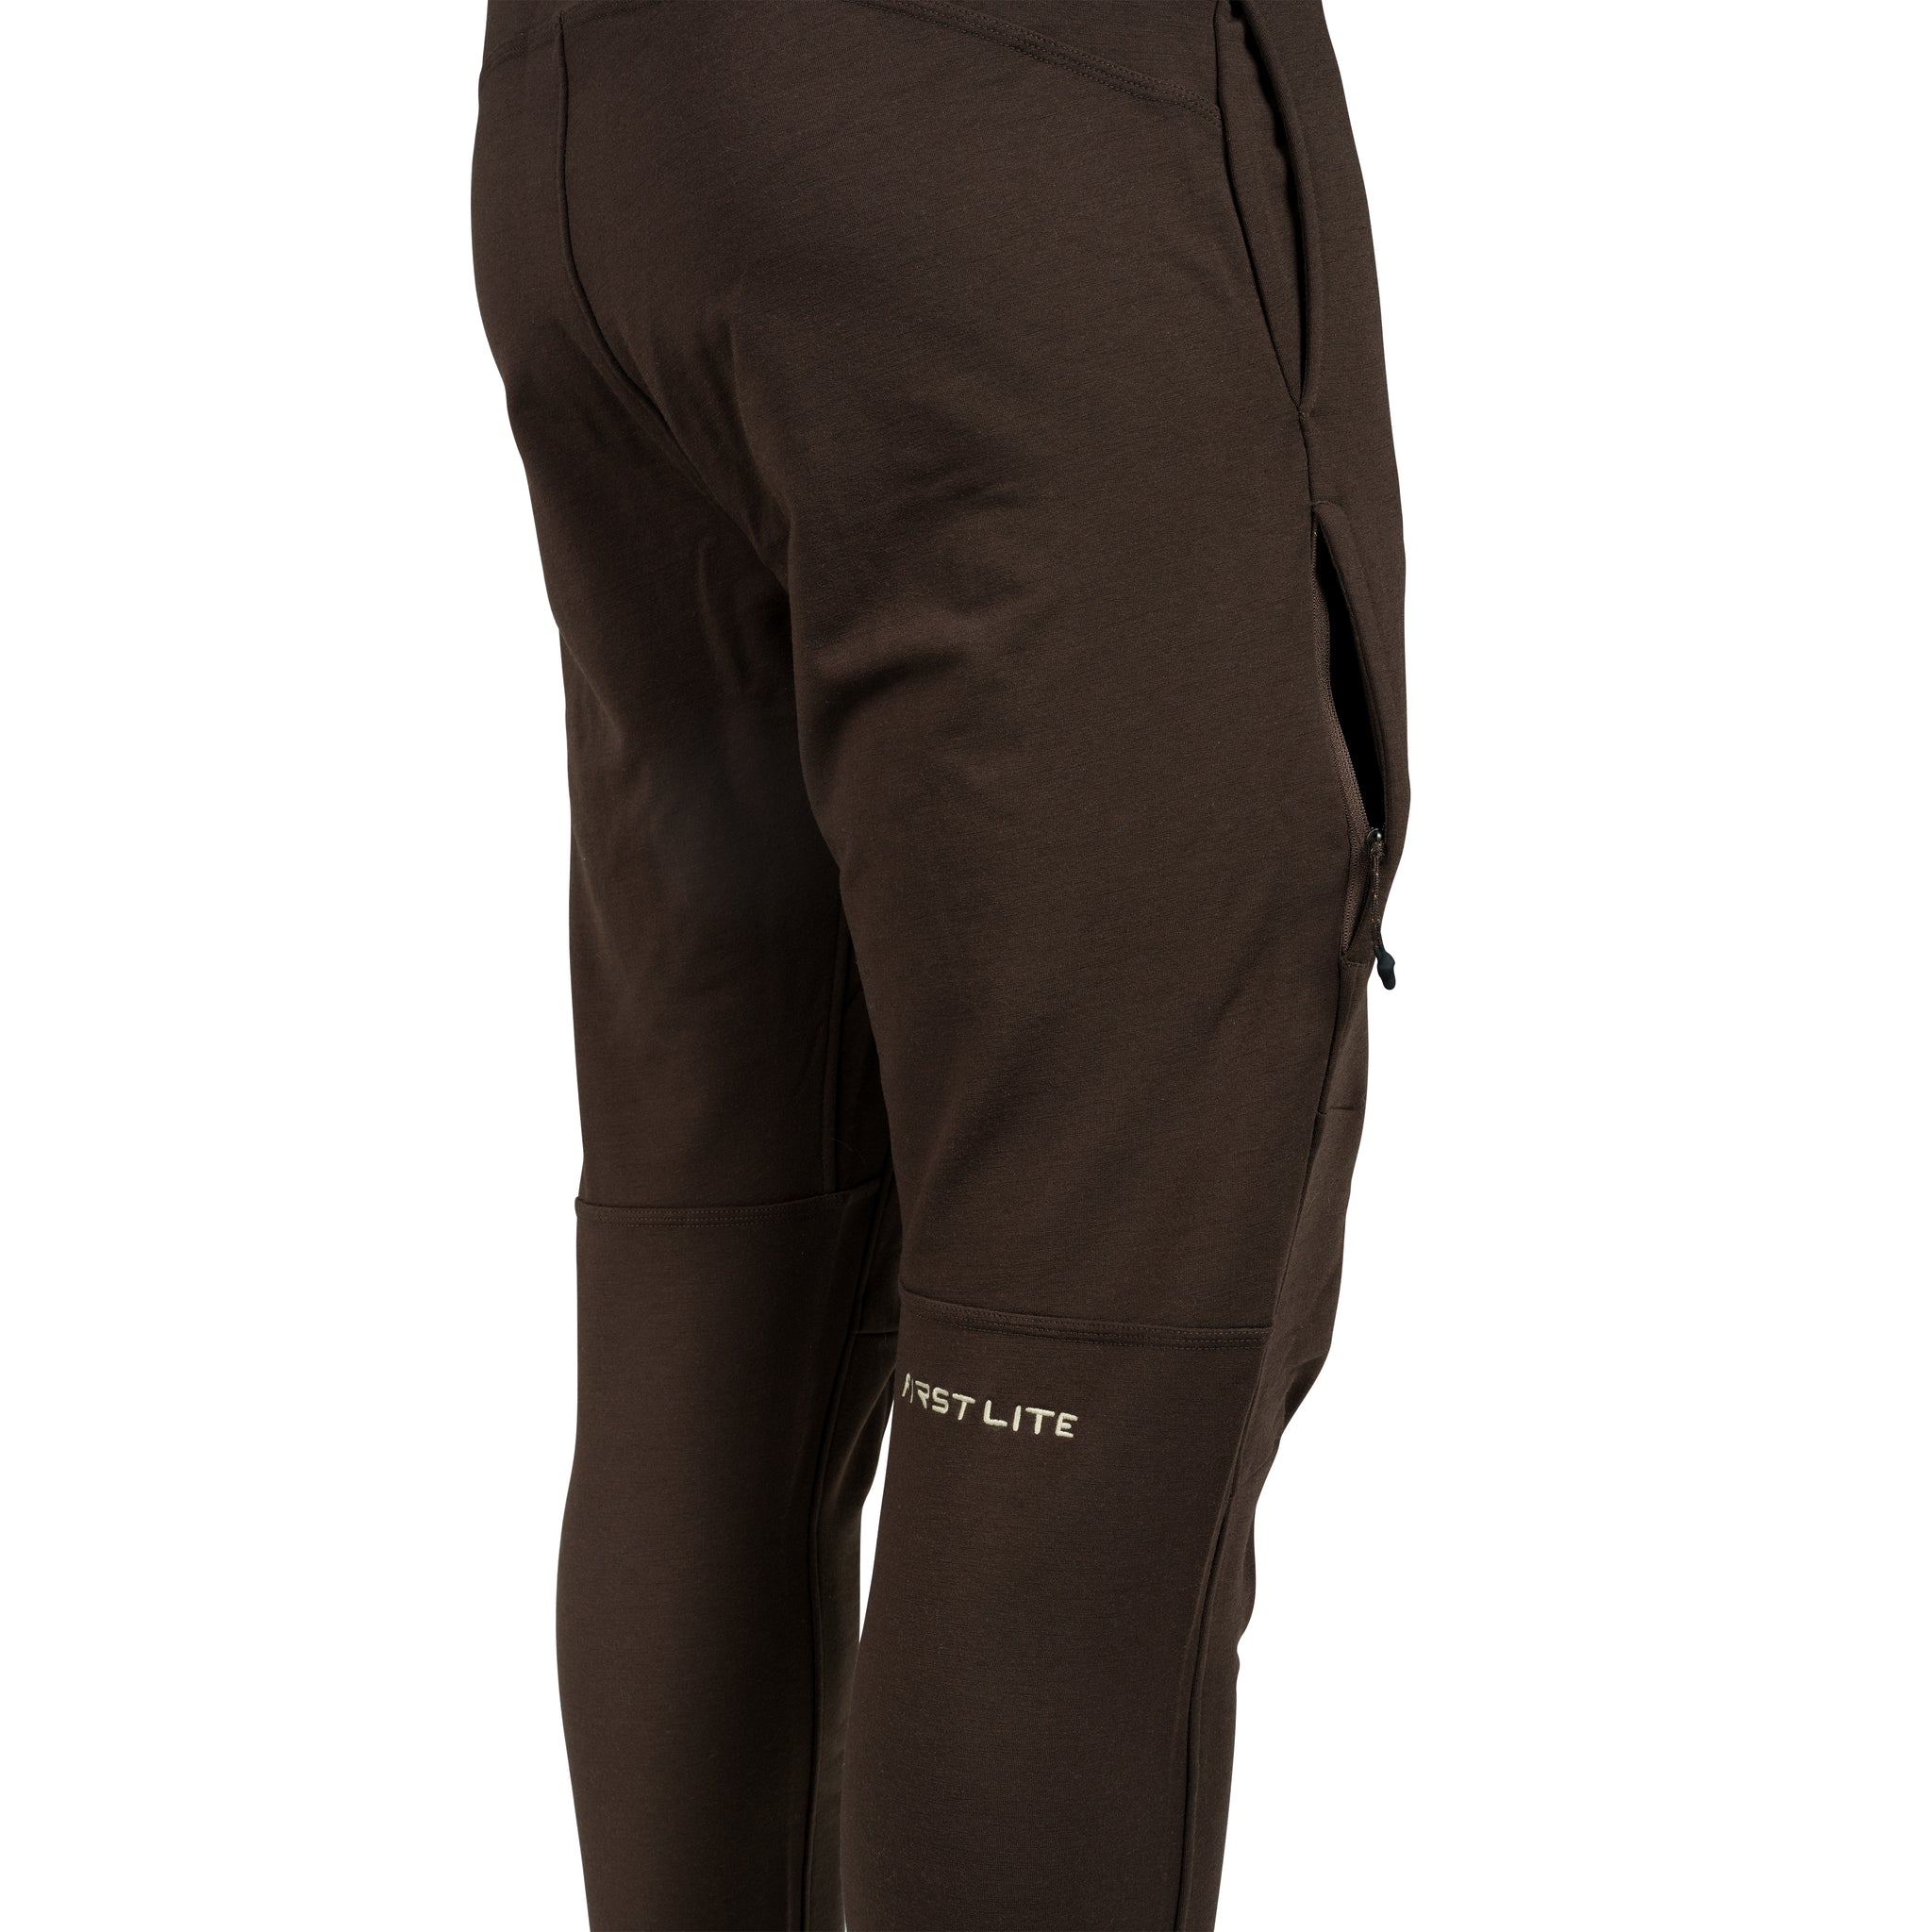 First Lite Rugged Wool Wader Pant side